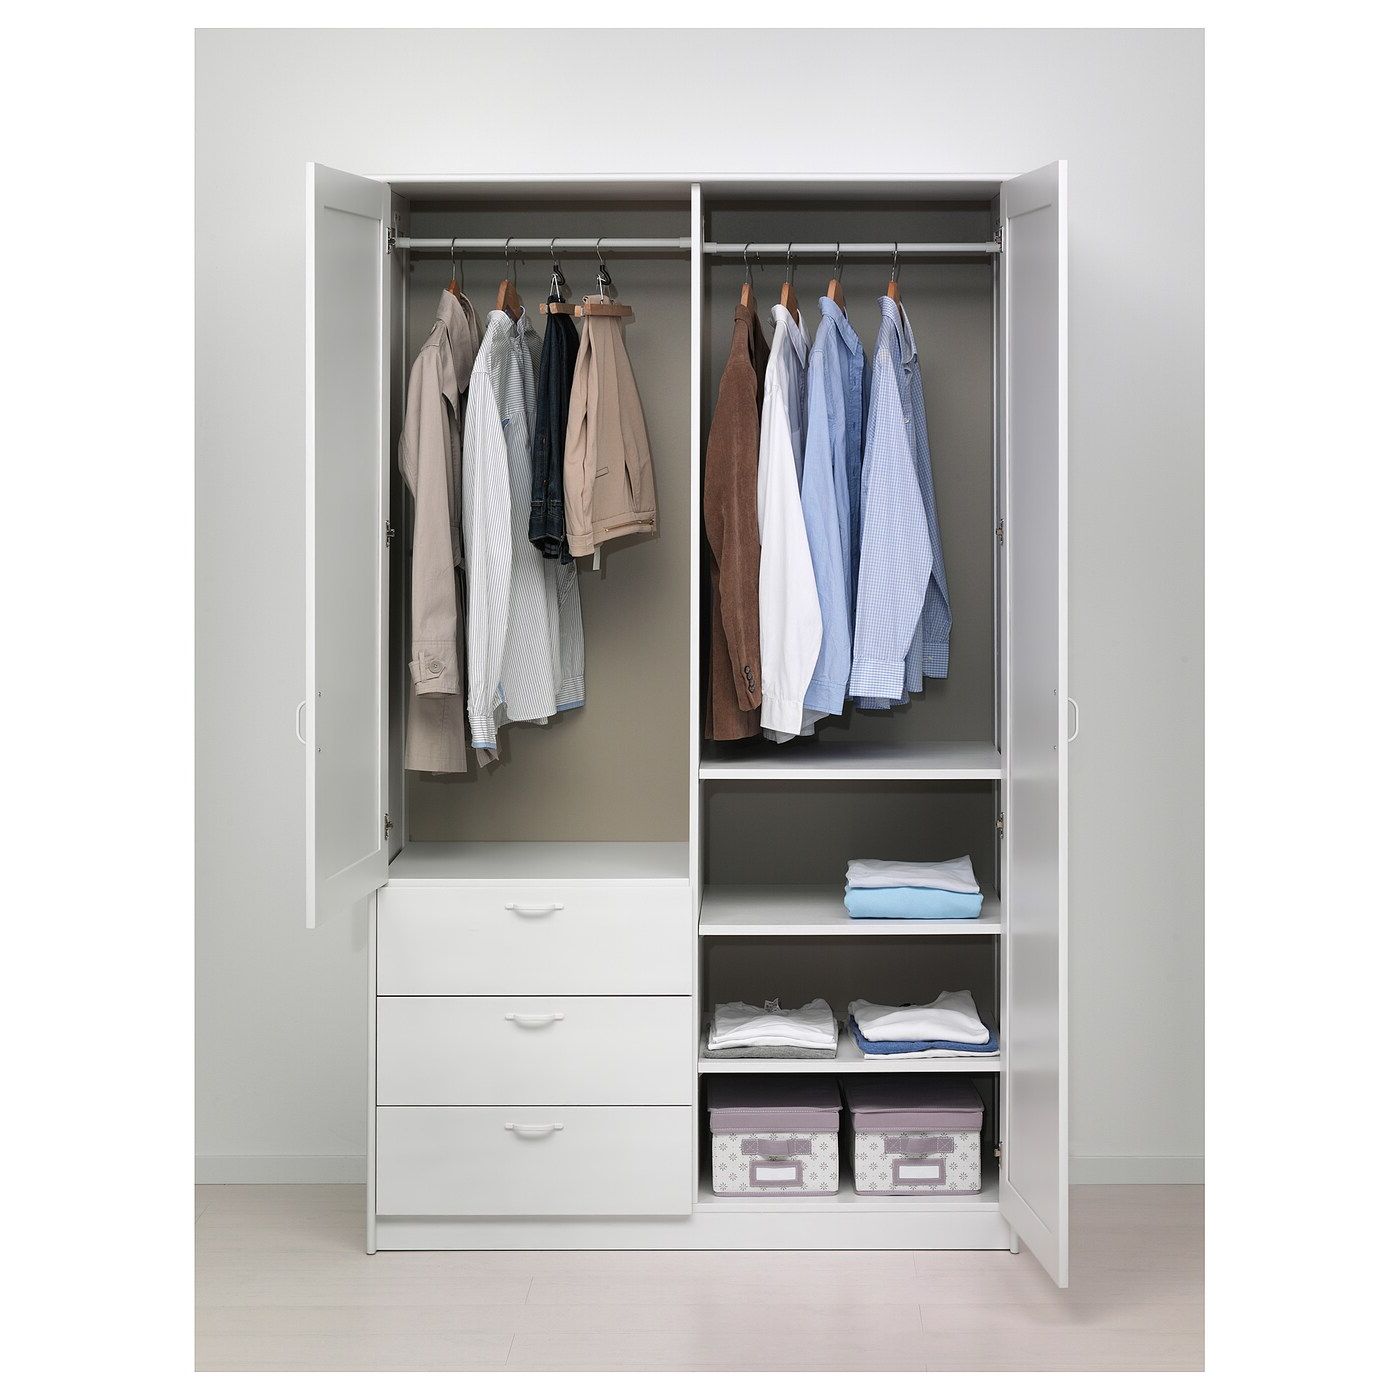 Musken Wardrobe With 2 Doors+3 Drawers, White, 124x60x201 Cm – Ikea Inside Wardrobes Drawers And Shelves Ikea (View 7 of 20)